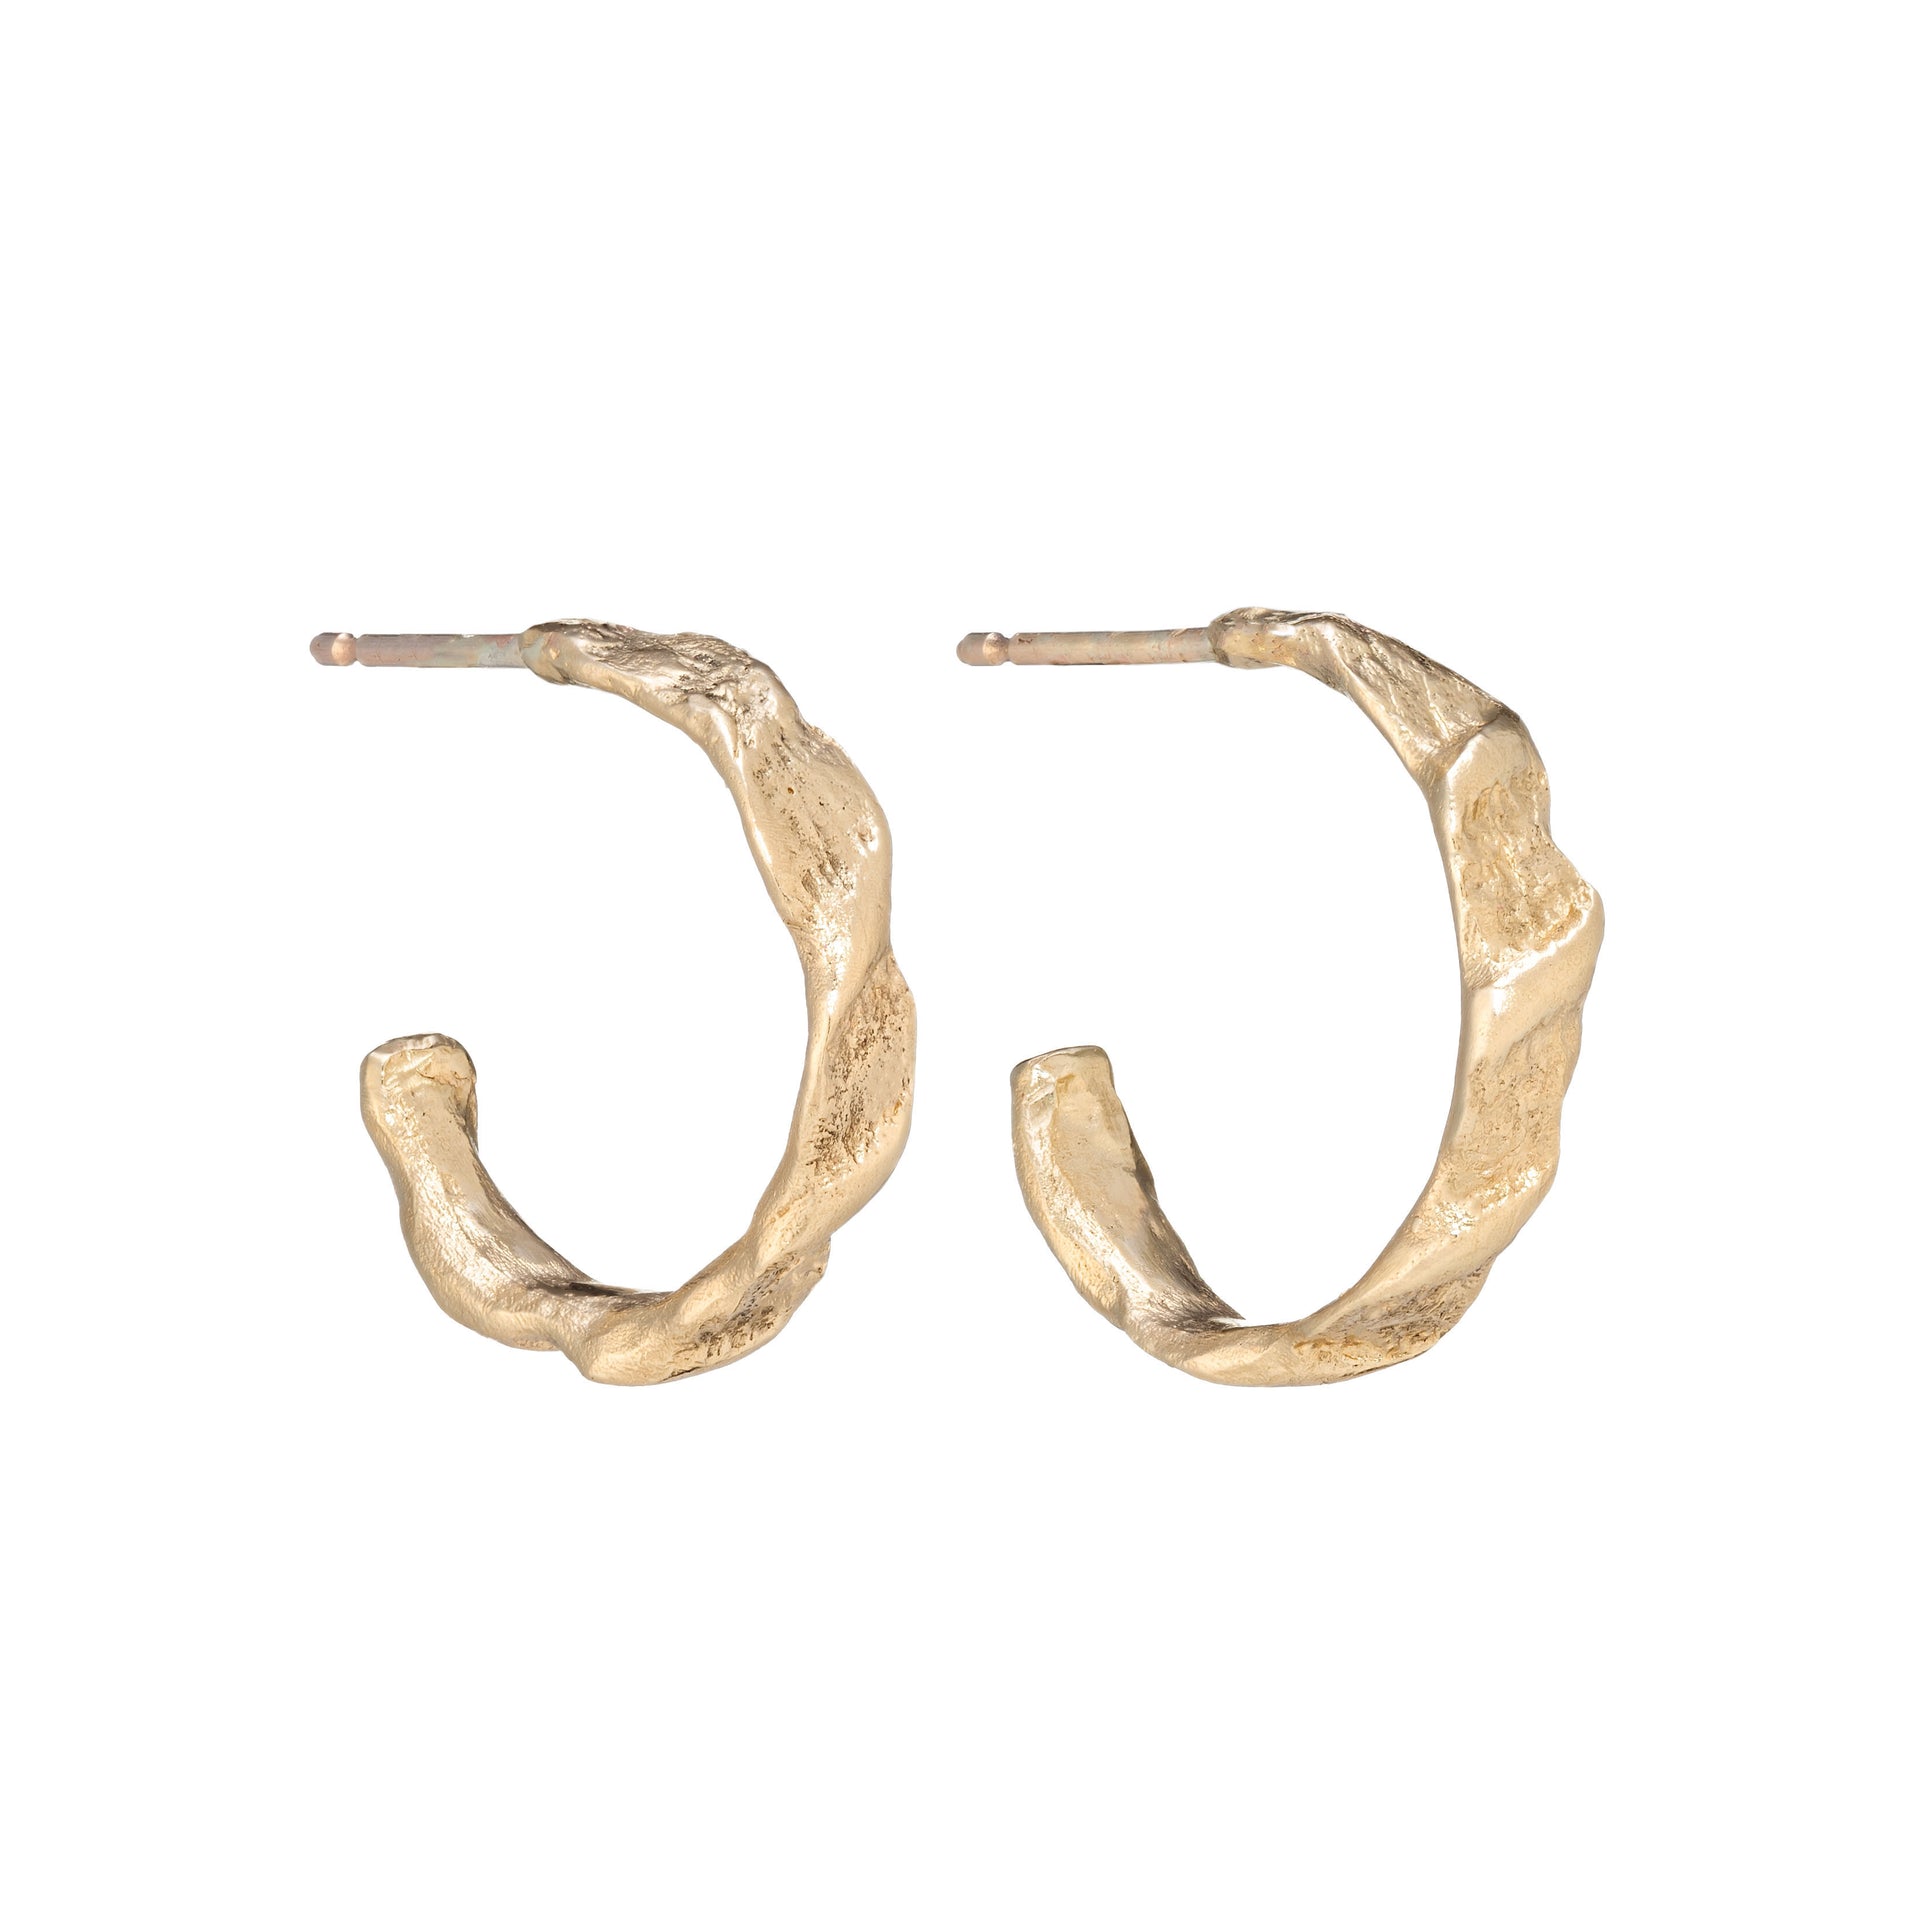 Cockle Hoops 9ct Gold